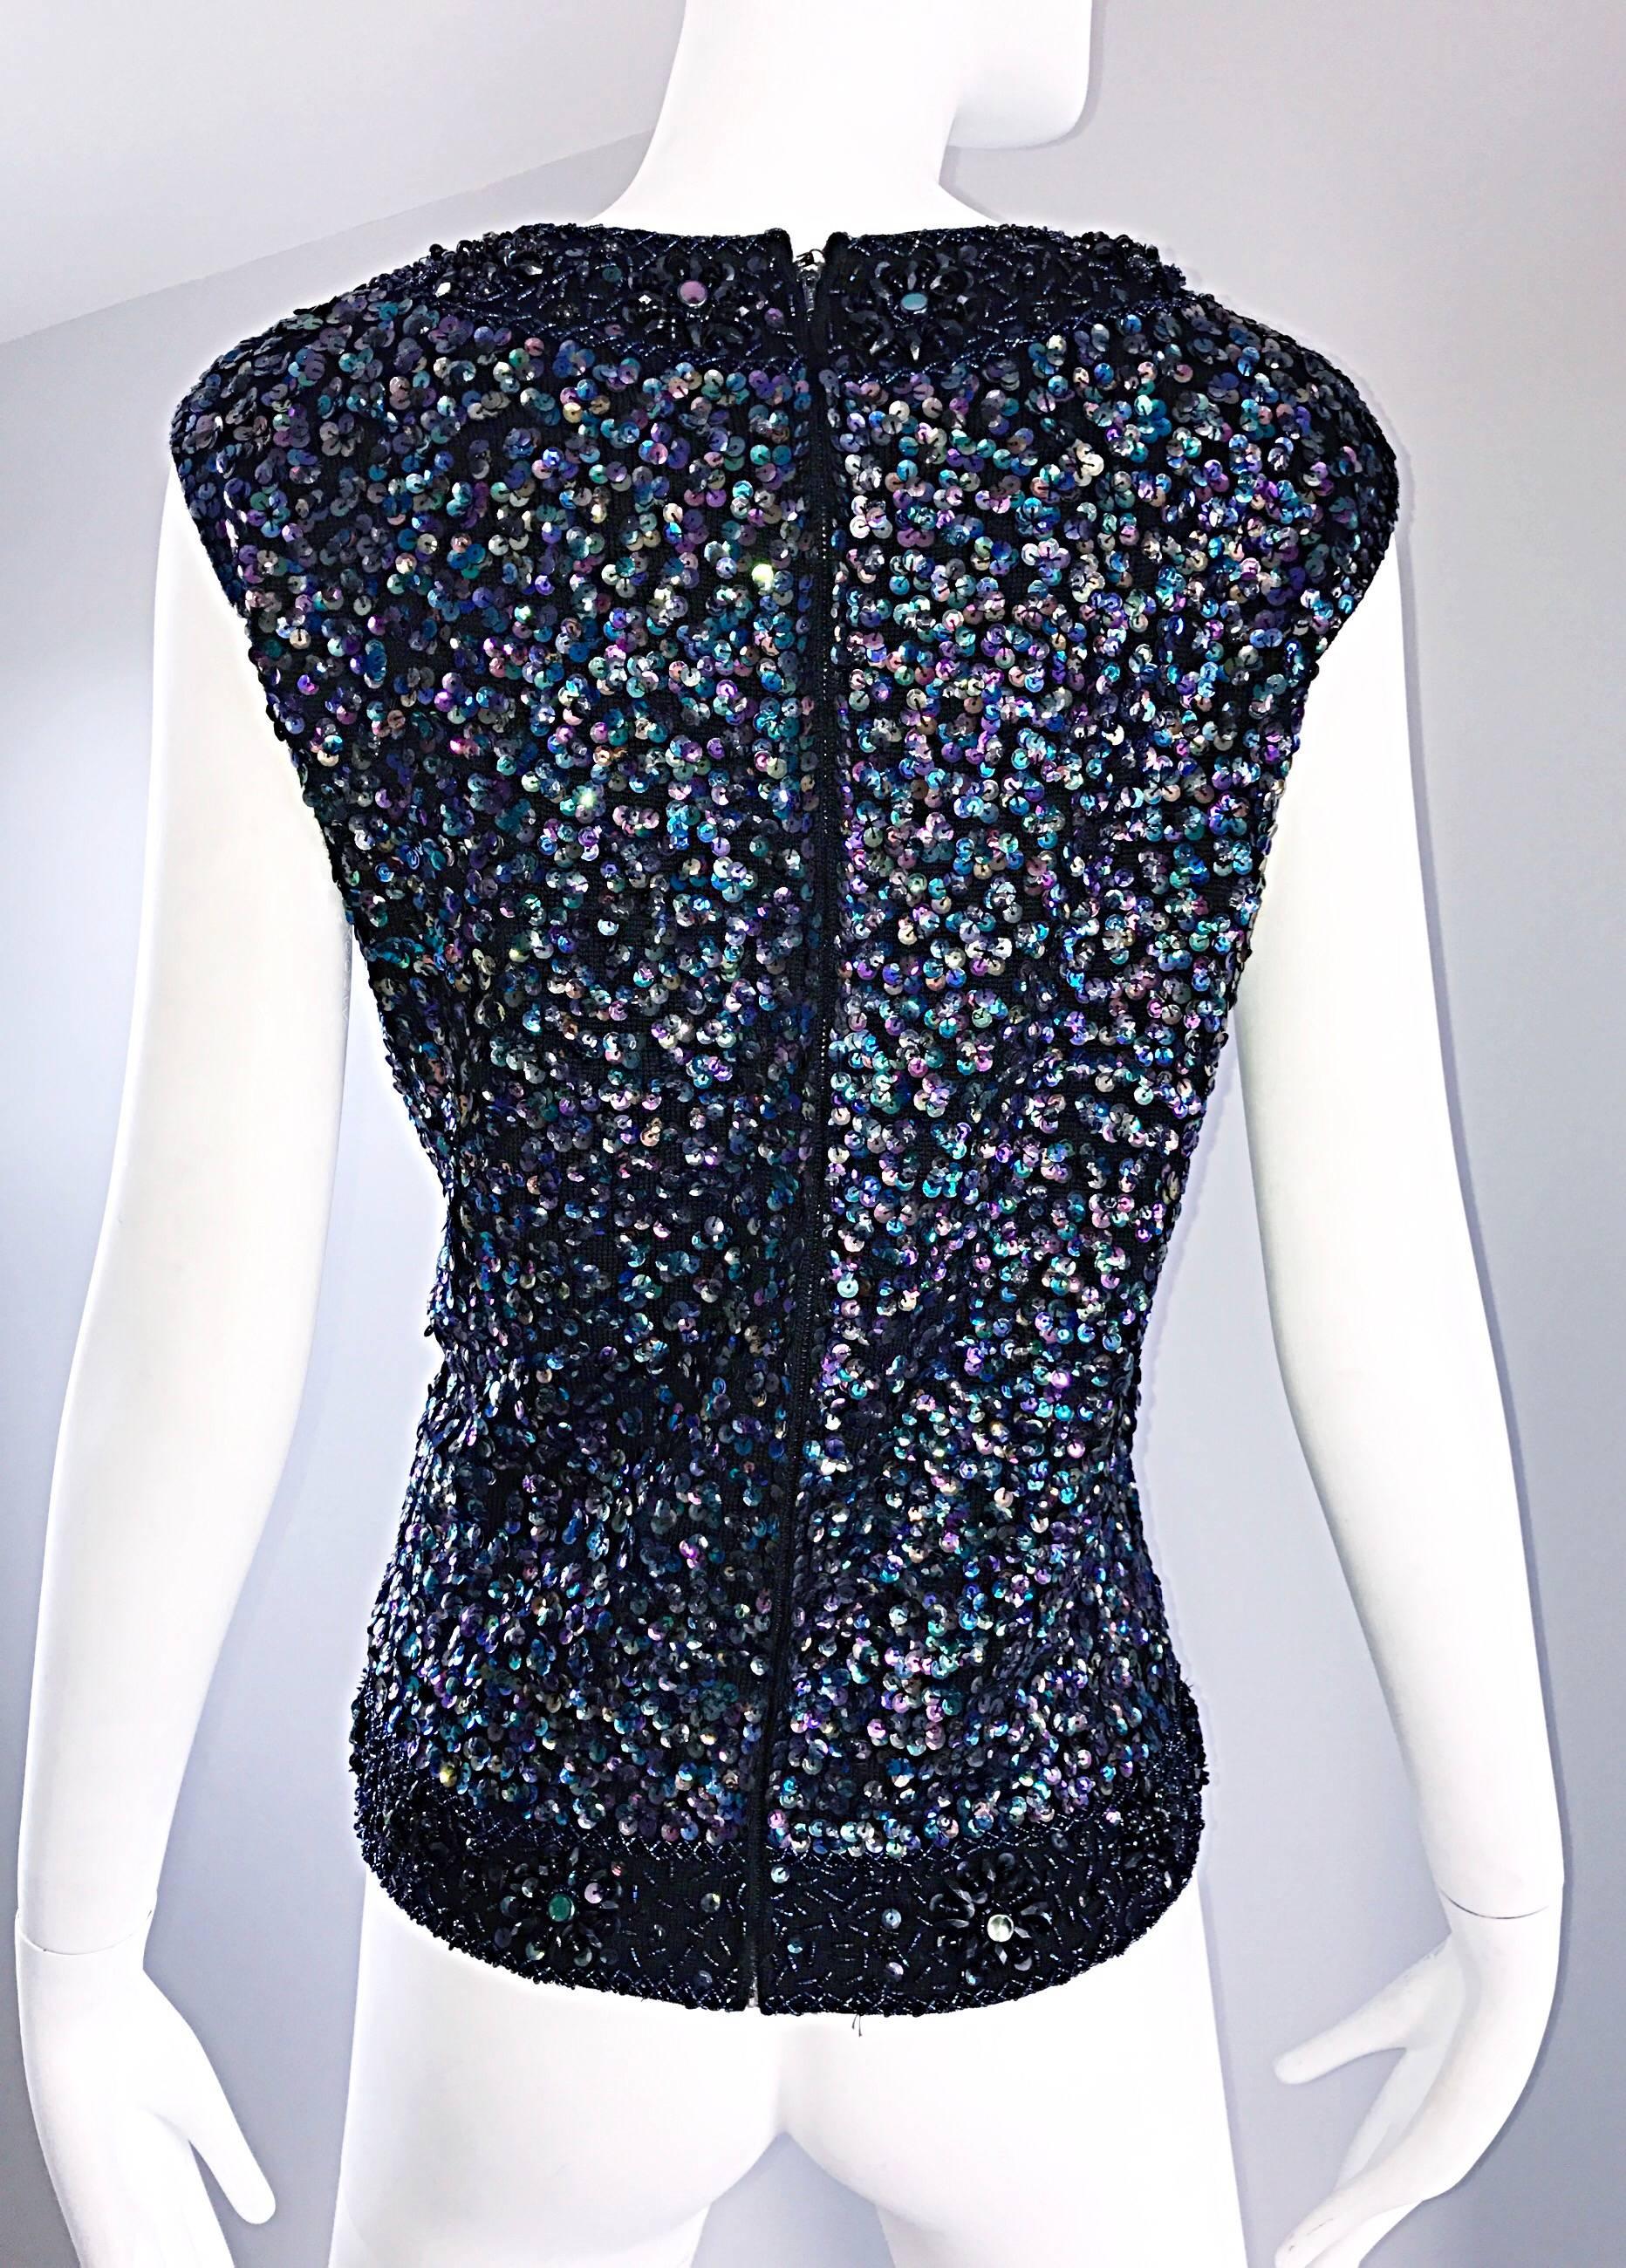 Women's Larger Size 1960s Londoner Black Sequined Wool Sleeveless Vintage Sweater Top For Sale